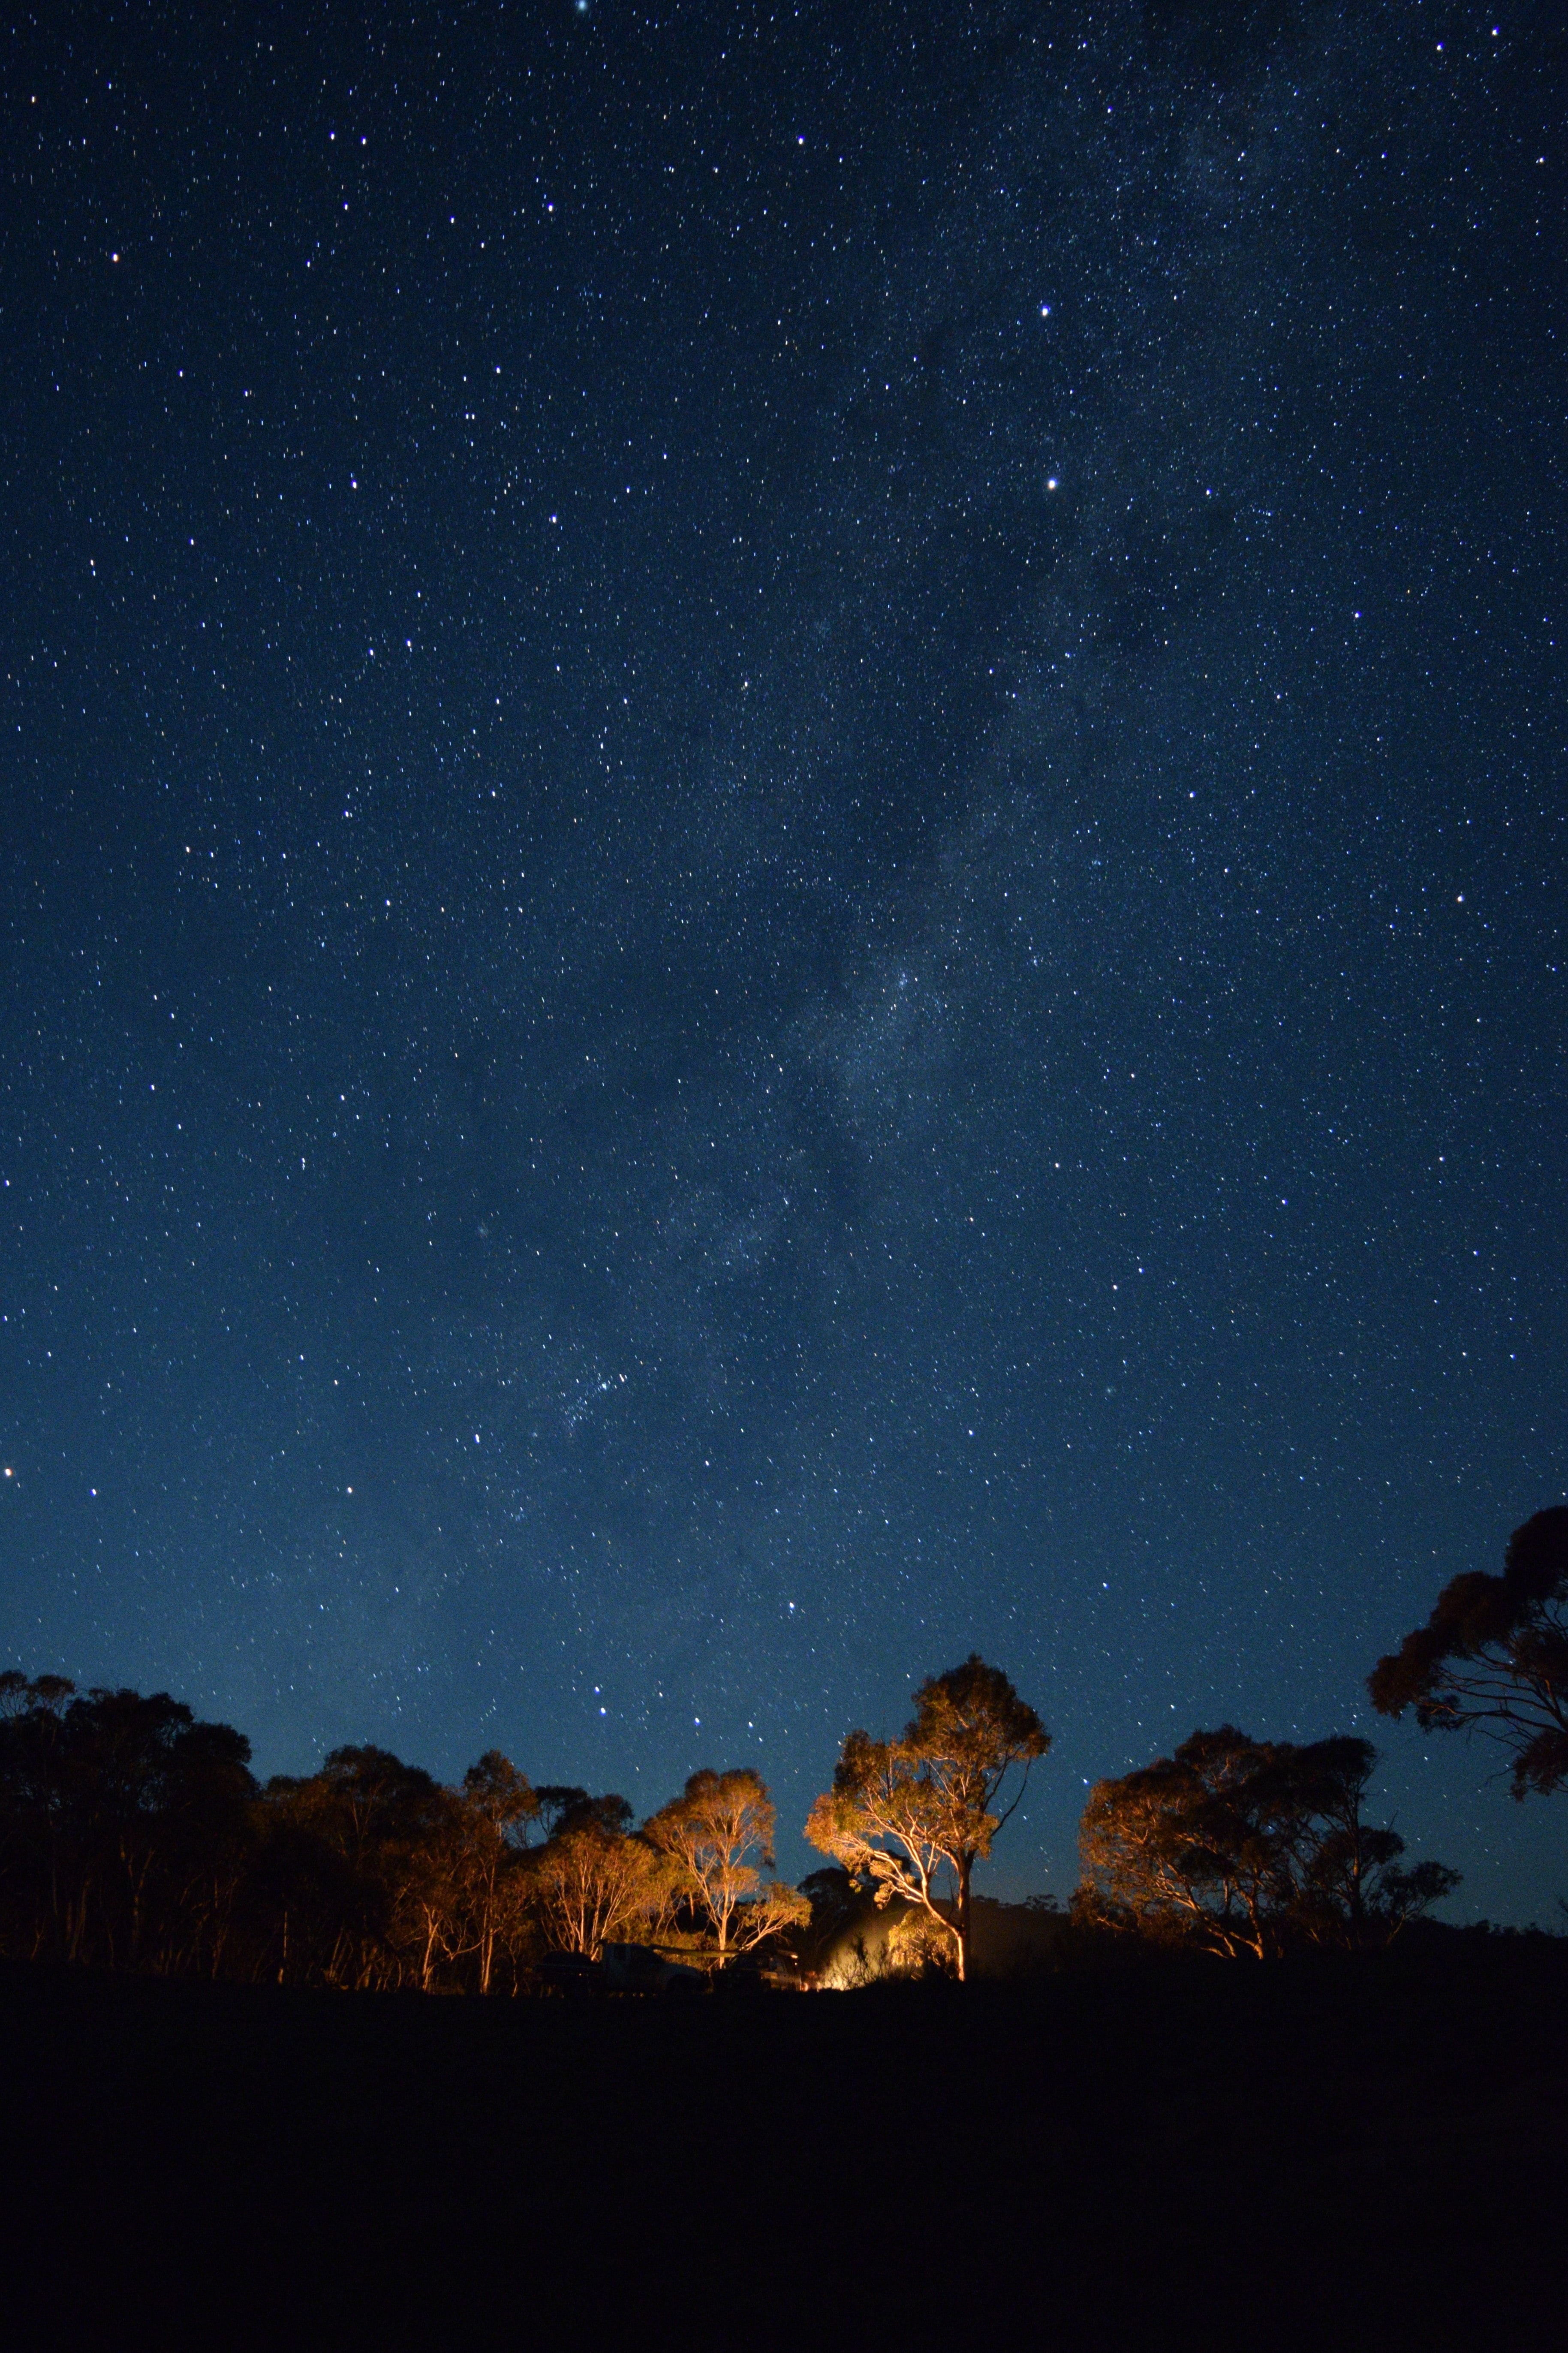 A starry night in the bush. The emu in the sky is visible in the milky way. There are large trees visible on the ground. Some of the trees are lit up from below, from either a fire or light.